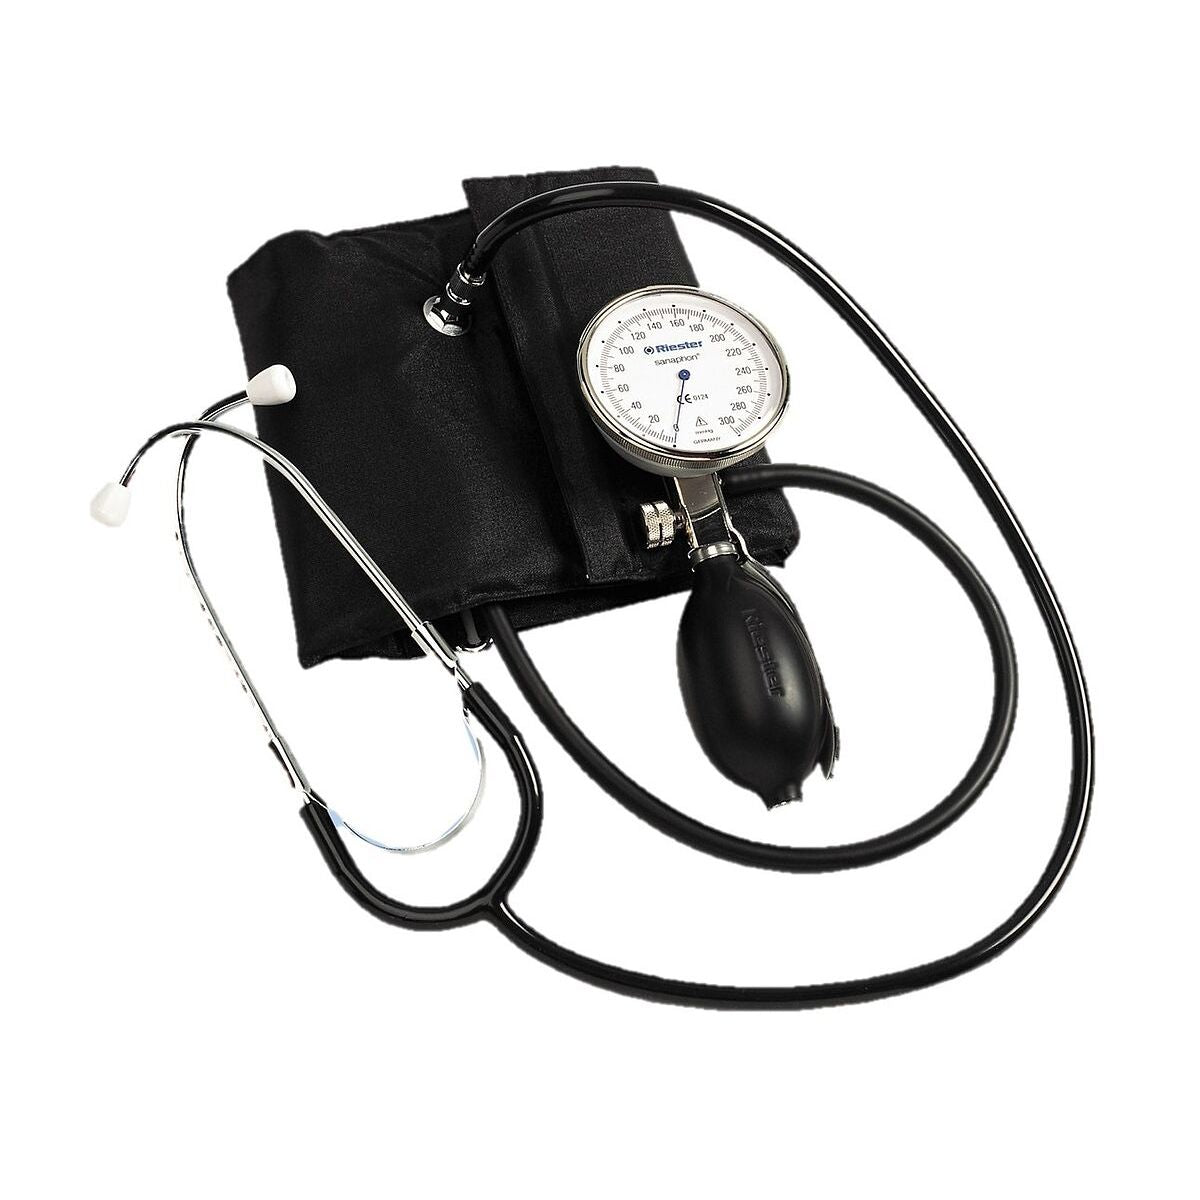 Riester Precisa N with Stethoscope and Cuff